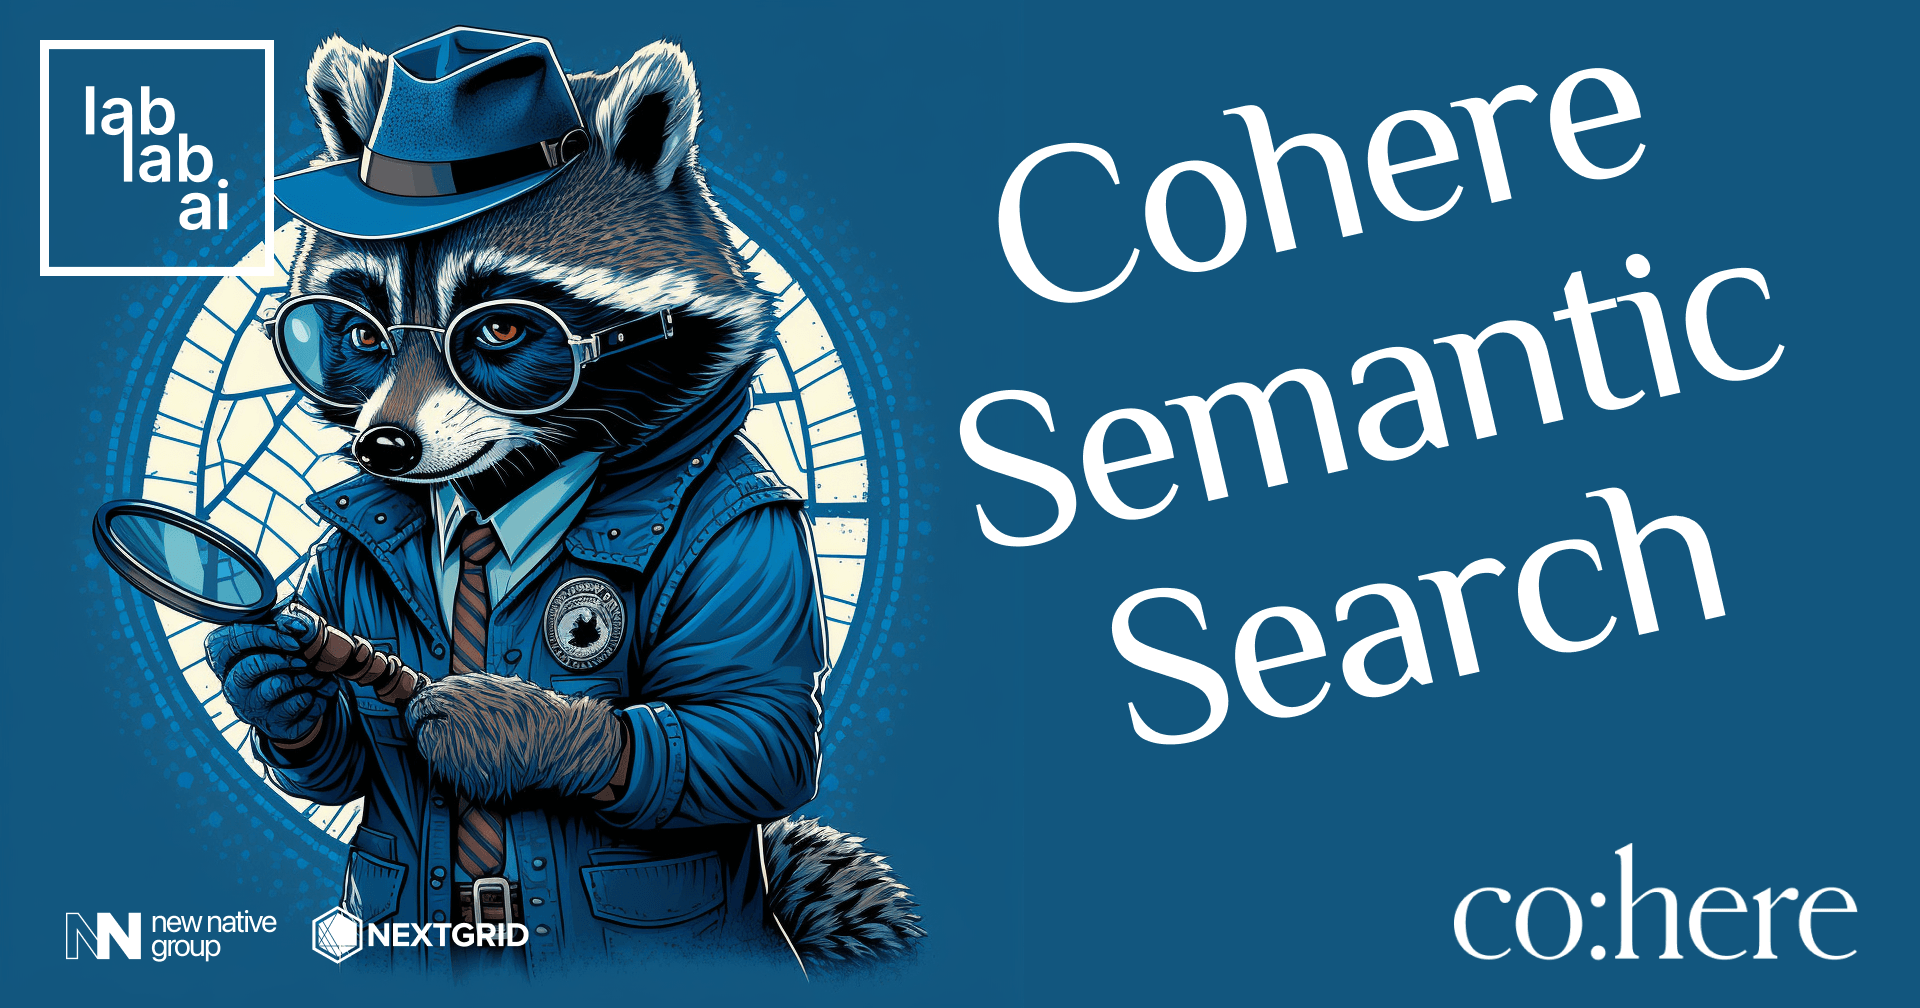 Cohere tutorial: Semantic Search with Cohere